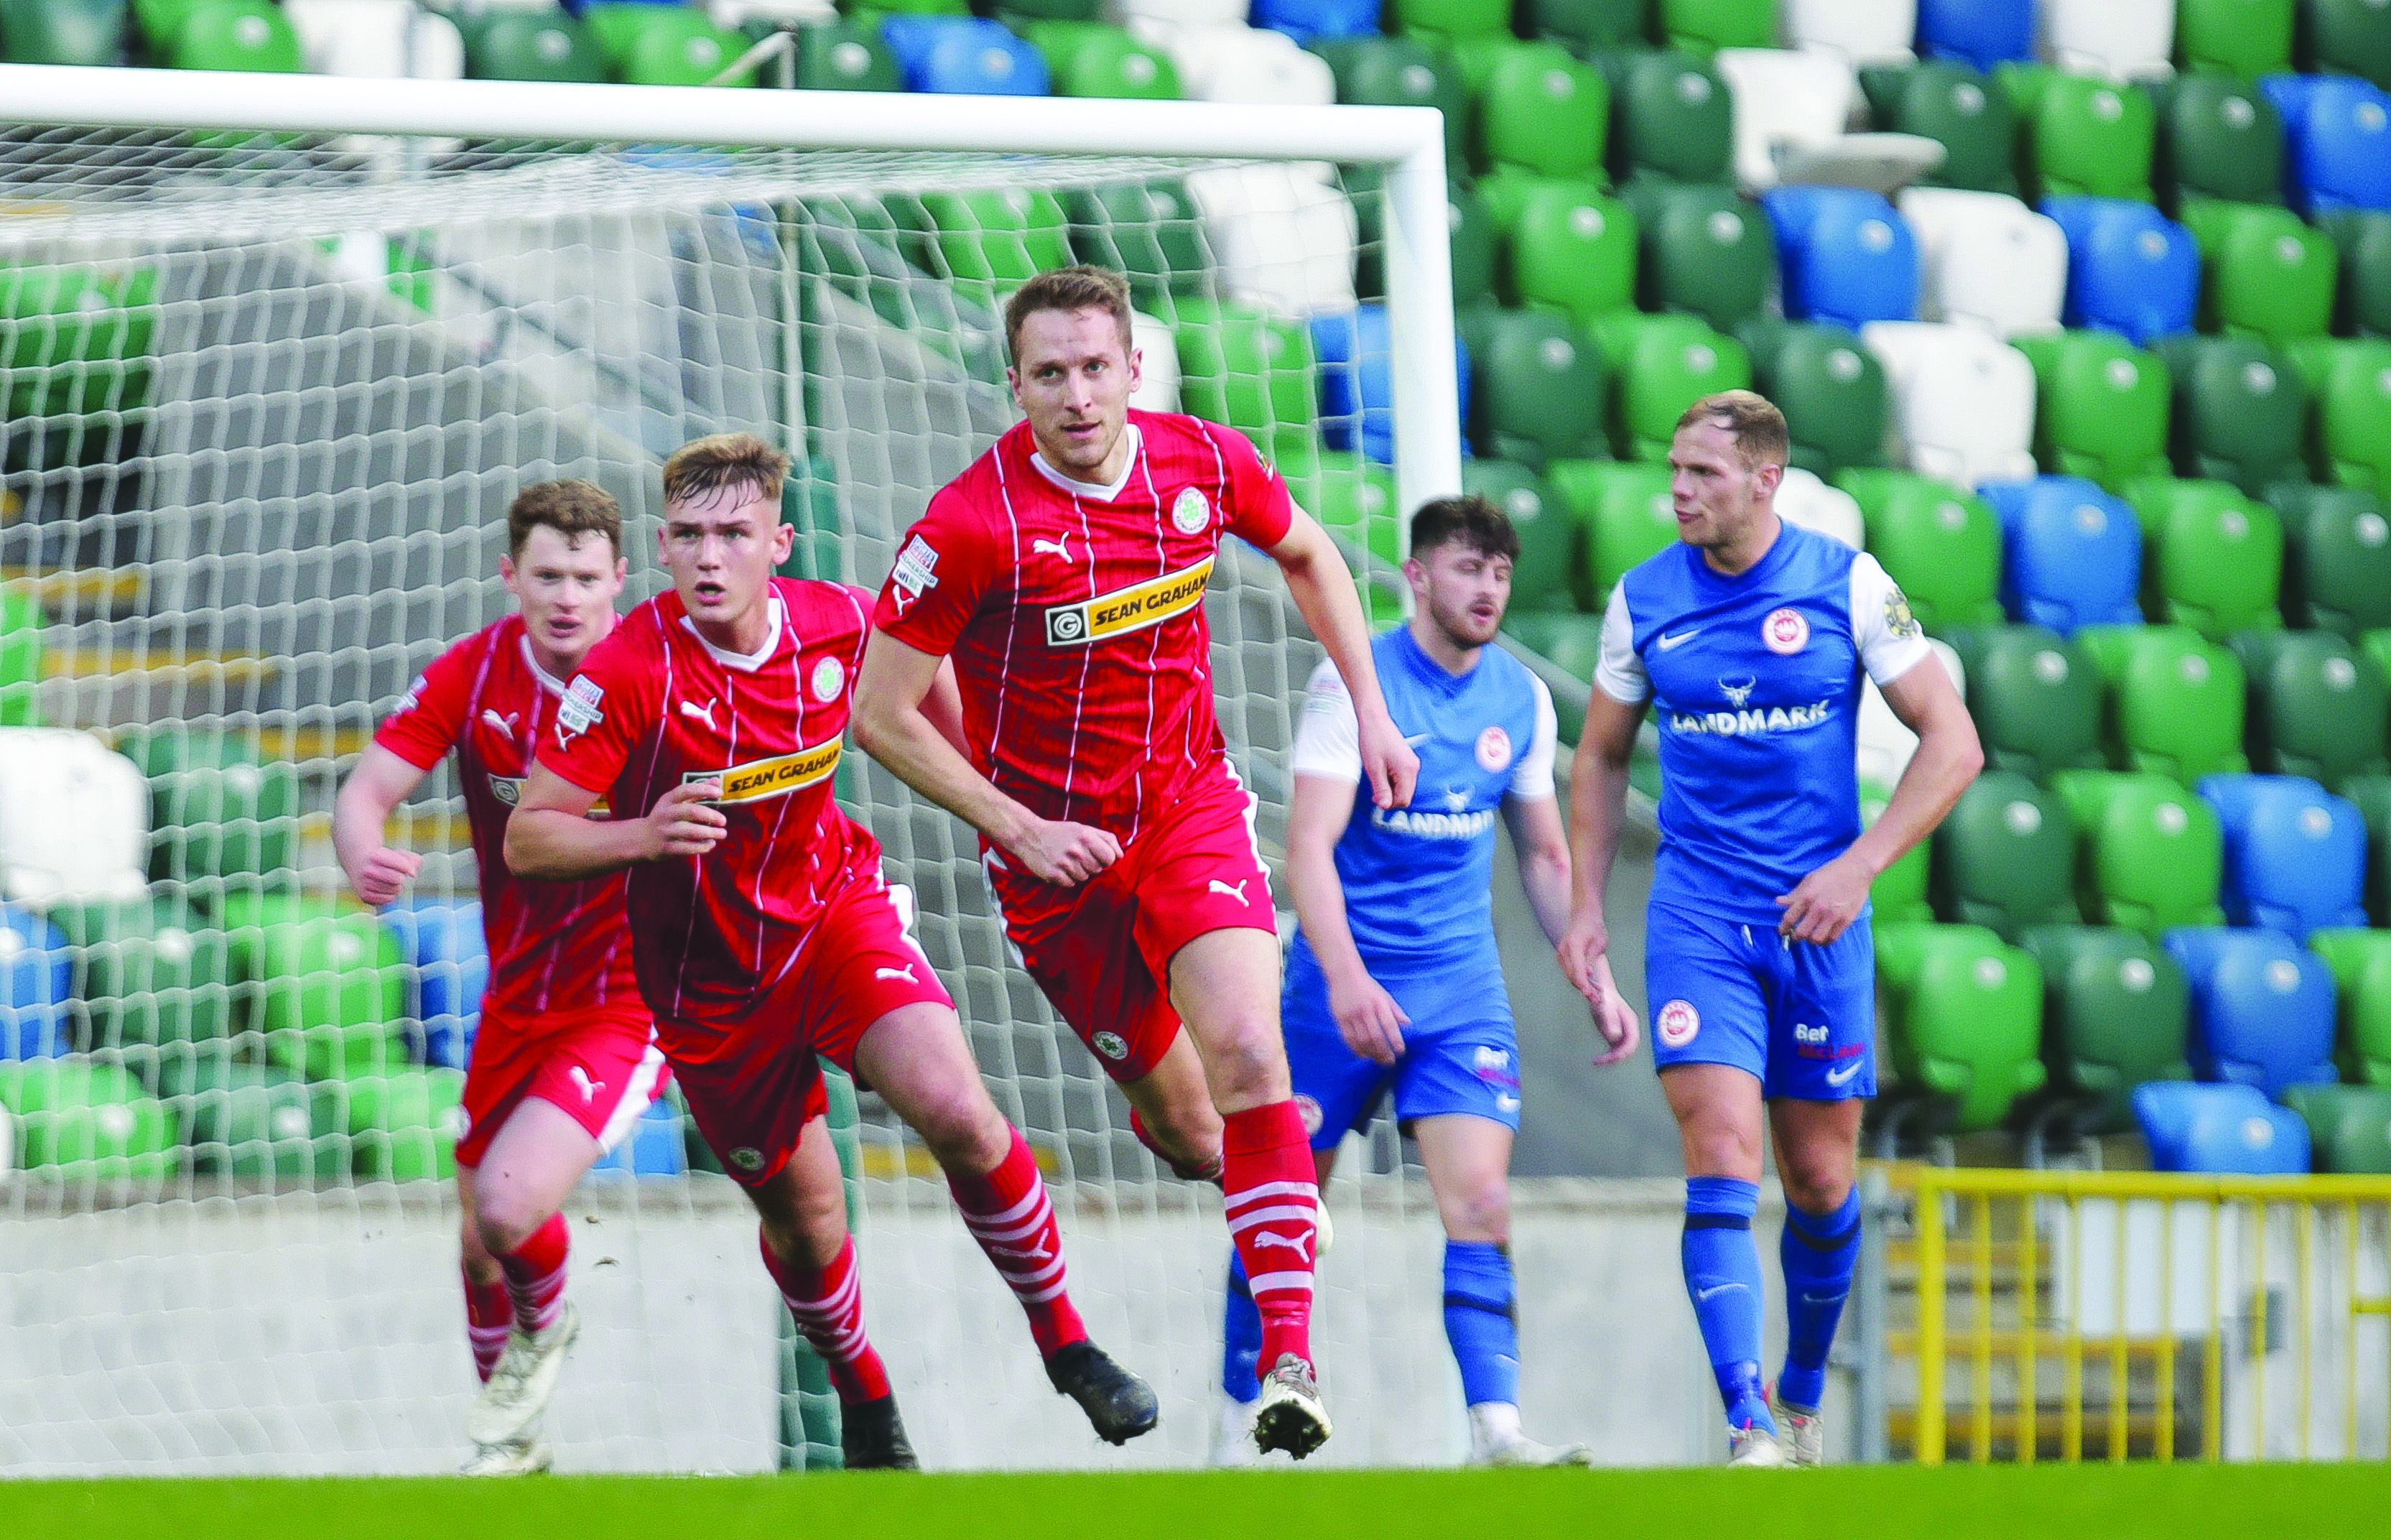 Jonny Addis wheels away after opening the scoring at Windsor Park on Saturday